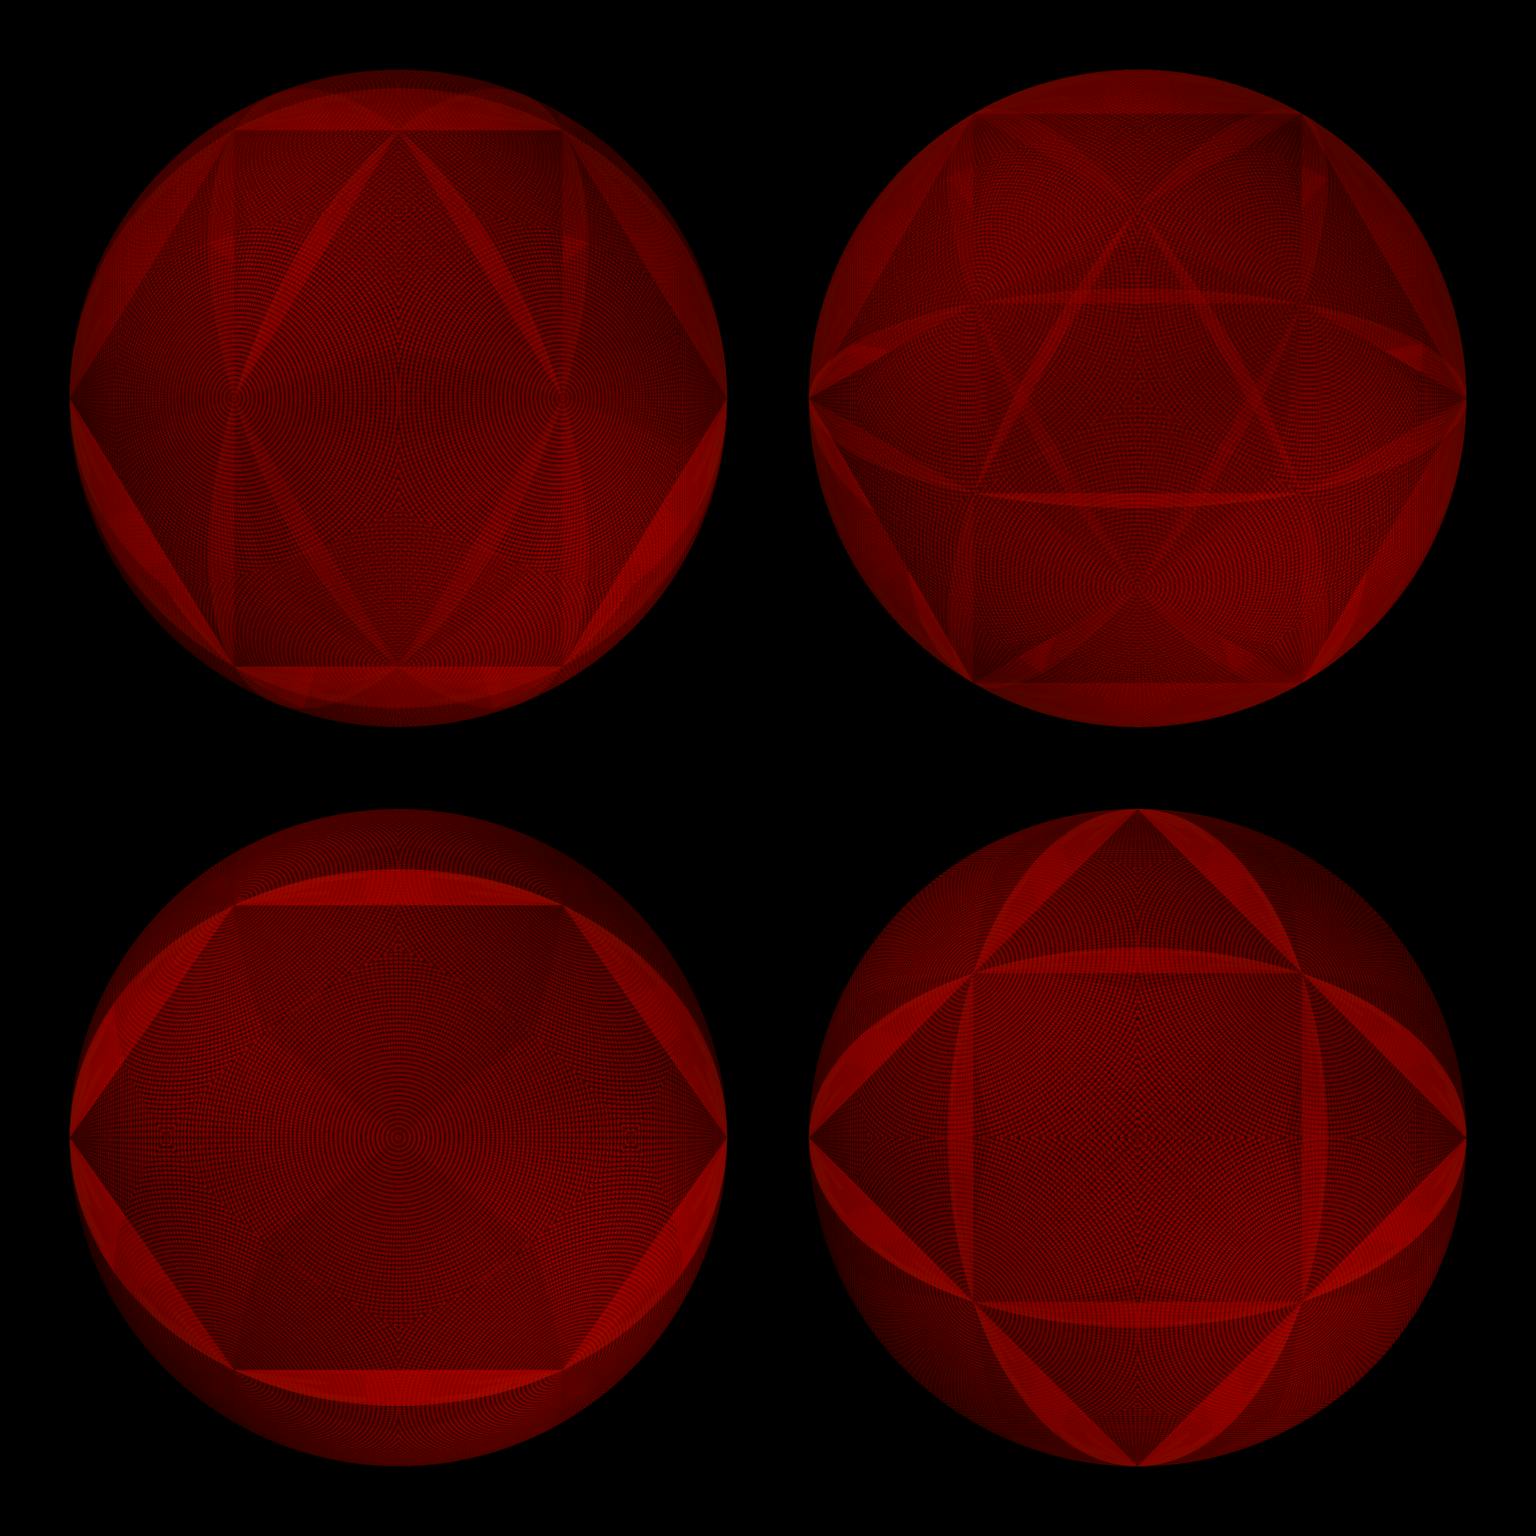 Image for entry 'The Black Holes at the Centre of these Orbs are Cuboctahedra'